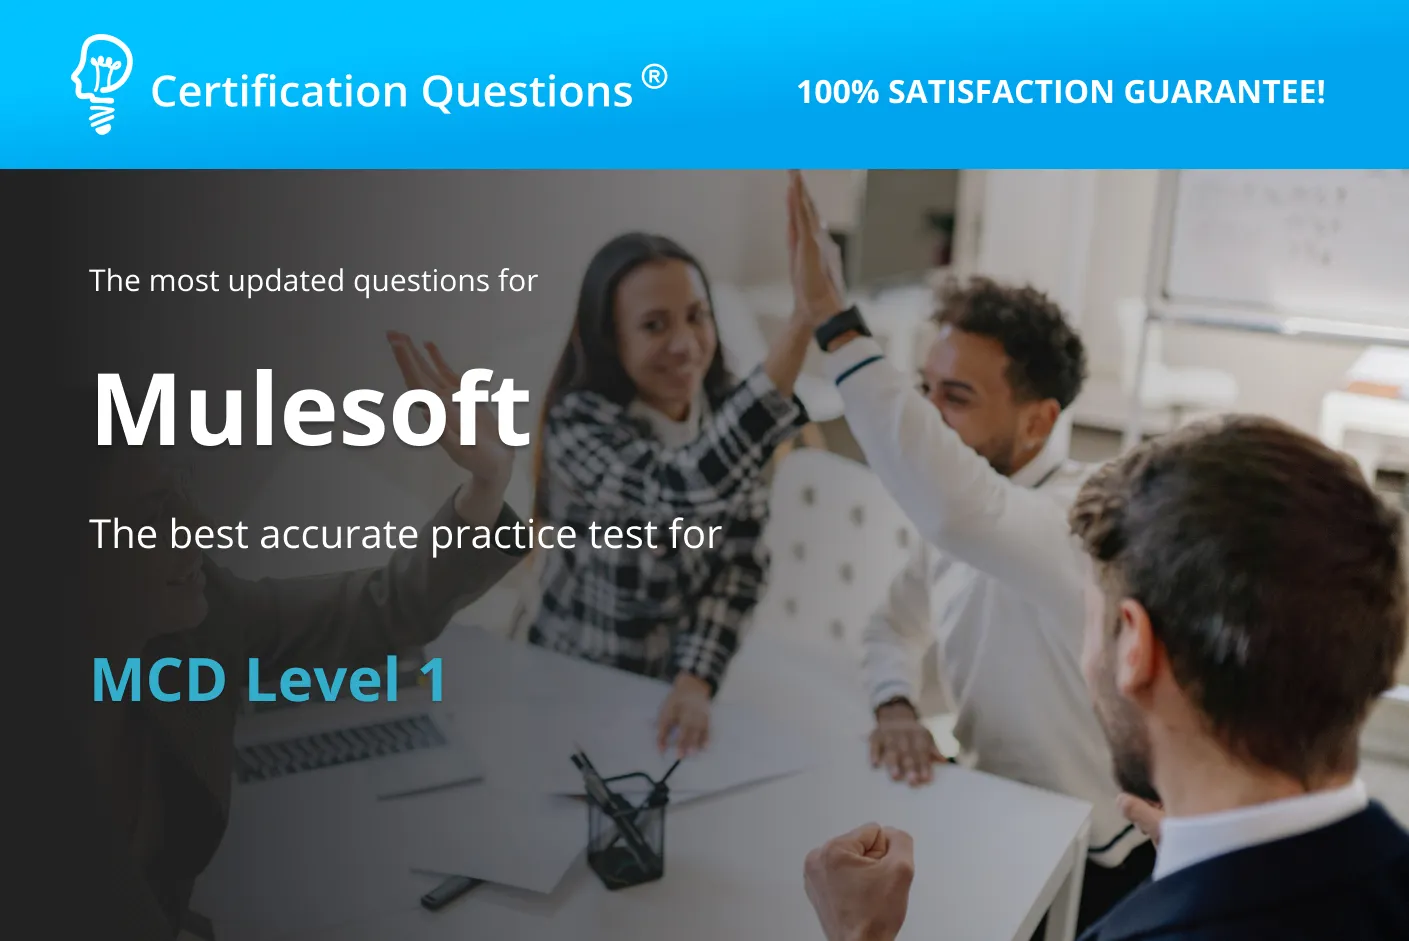 This image represents the mulesoft certification practice test